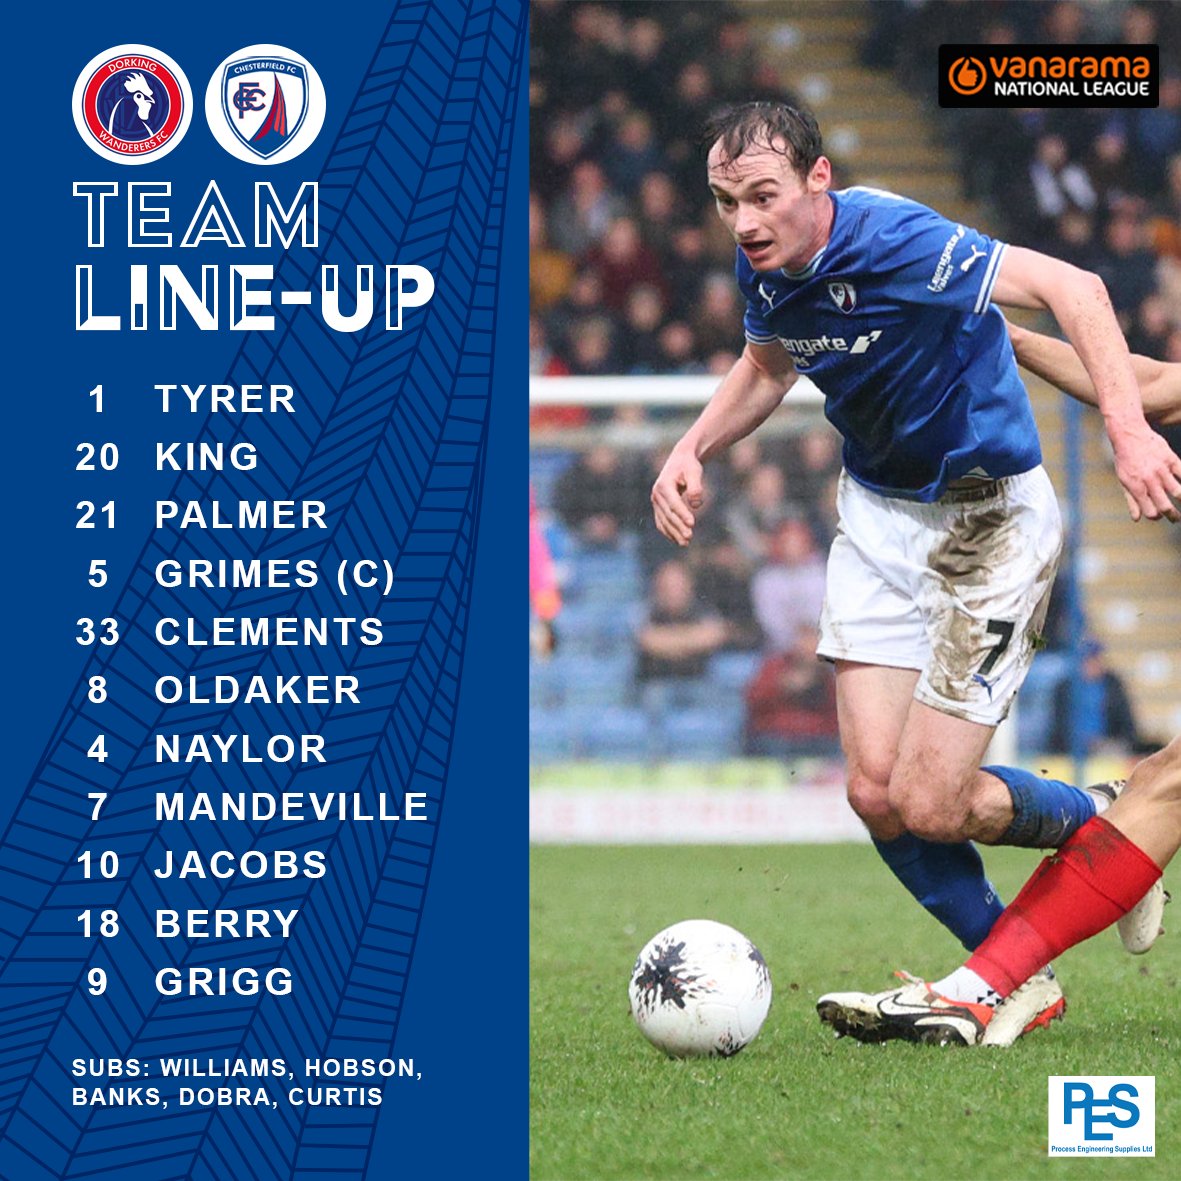 📝 𝗧𝗘𝗔𝗠 𝗡𝗘𝗪𝗦 📝 Paul Cook makes four changes as Jeff King, Darren Oldaker, James Berry and Will Grigg come into the starting XI! Harley Curtis comes onto the bench. #Spireites